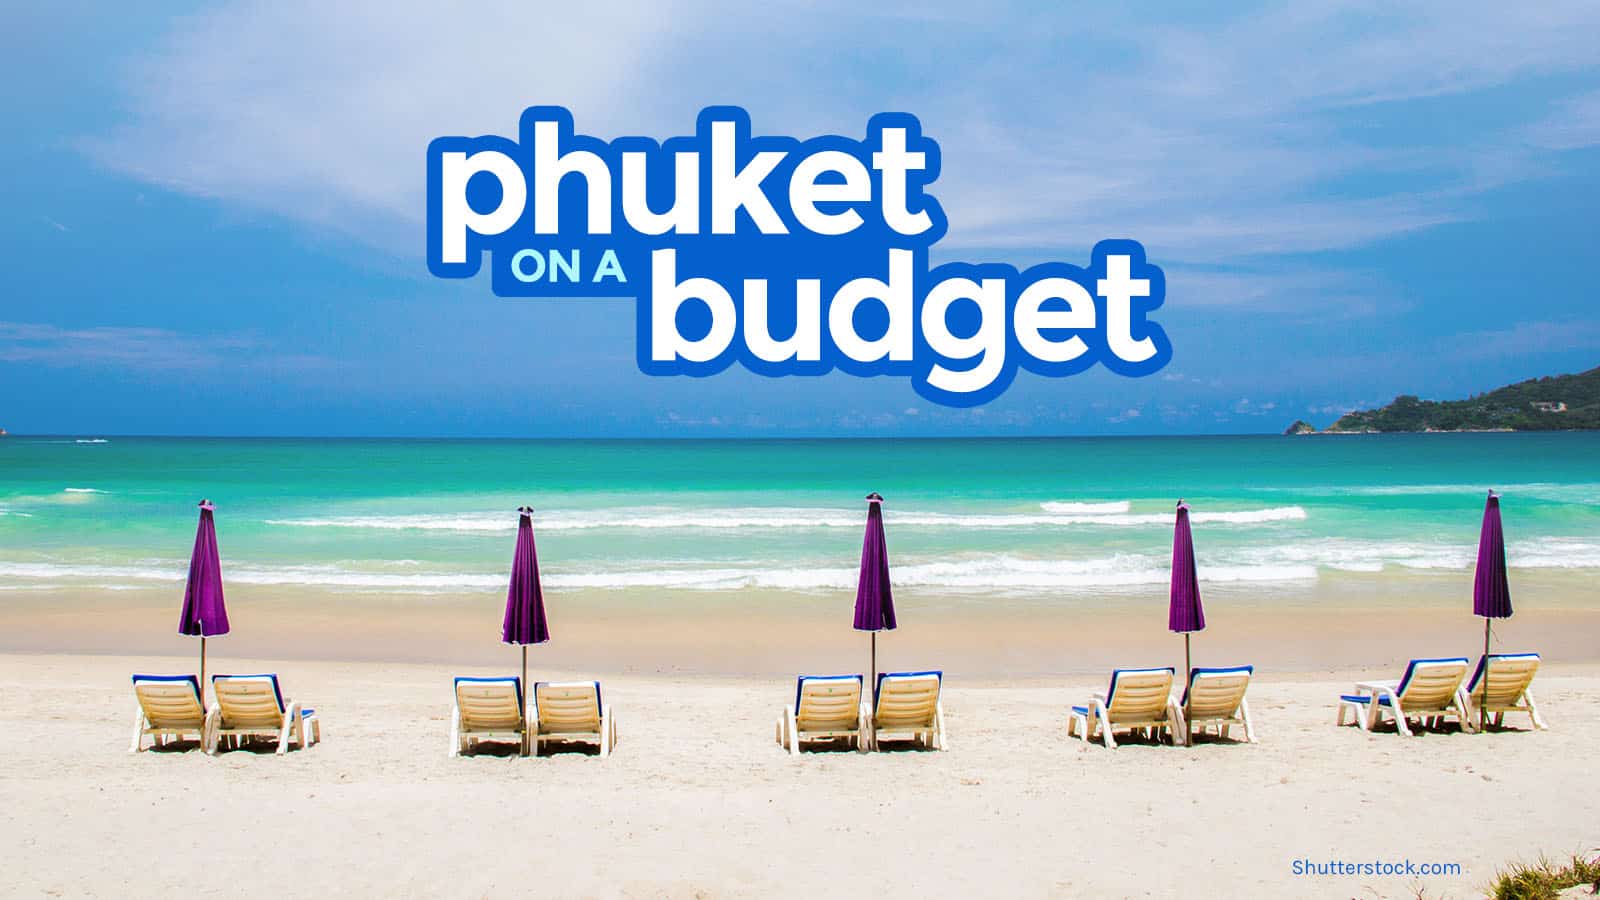 PHUKET TRAVEL GUIDE: Budget, Itinerary, Things to Do